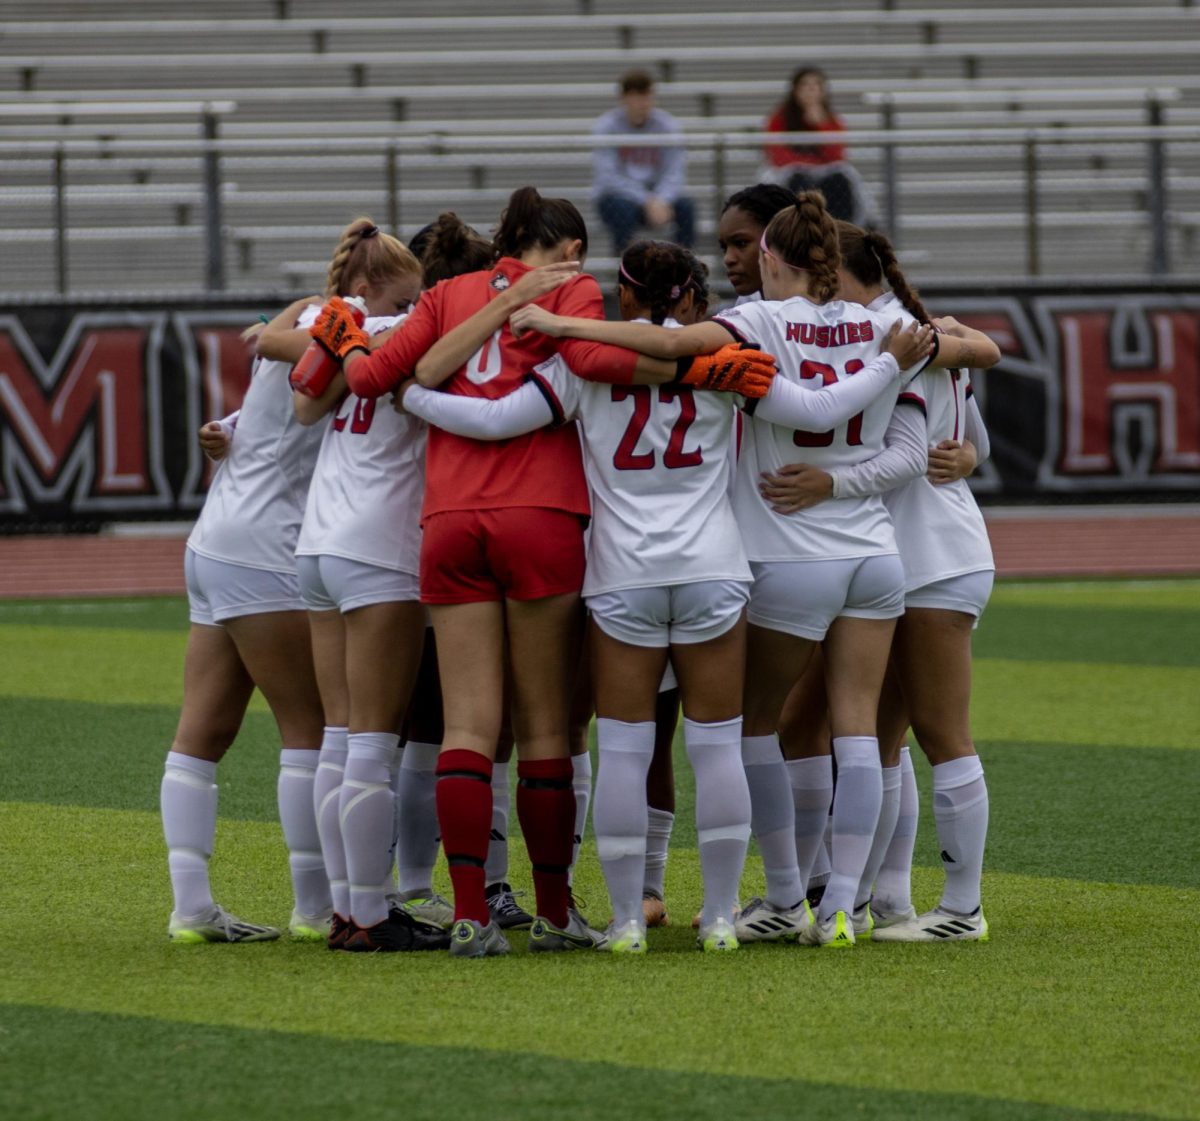 The NIU women’s soccer team huddles together before their match against Buffalo. The Huskies clinched a MAC Tournament berth with a victory over the Central Michigan University Chippewas on Sunday. (Tim Dodge | Northern Star)

